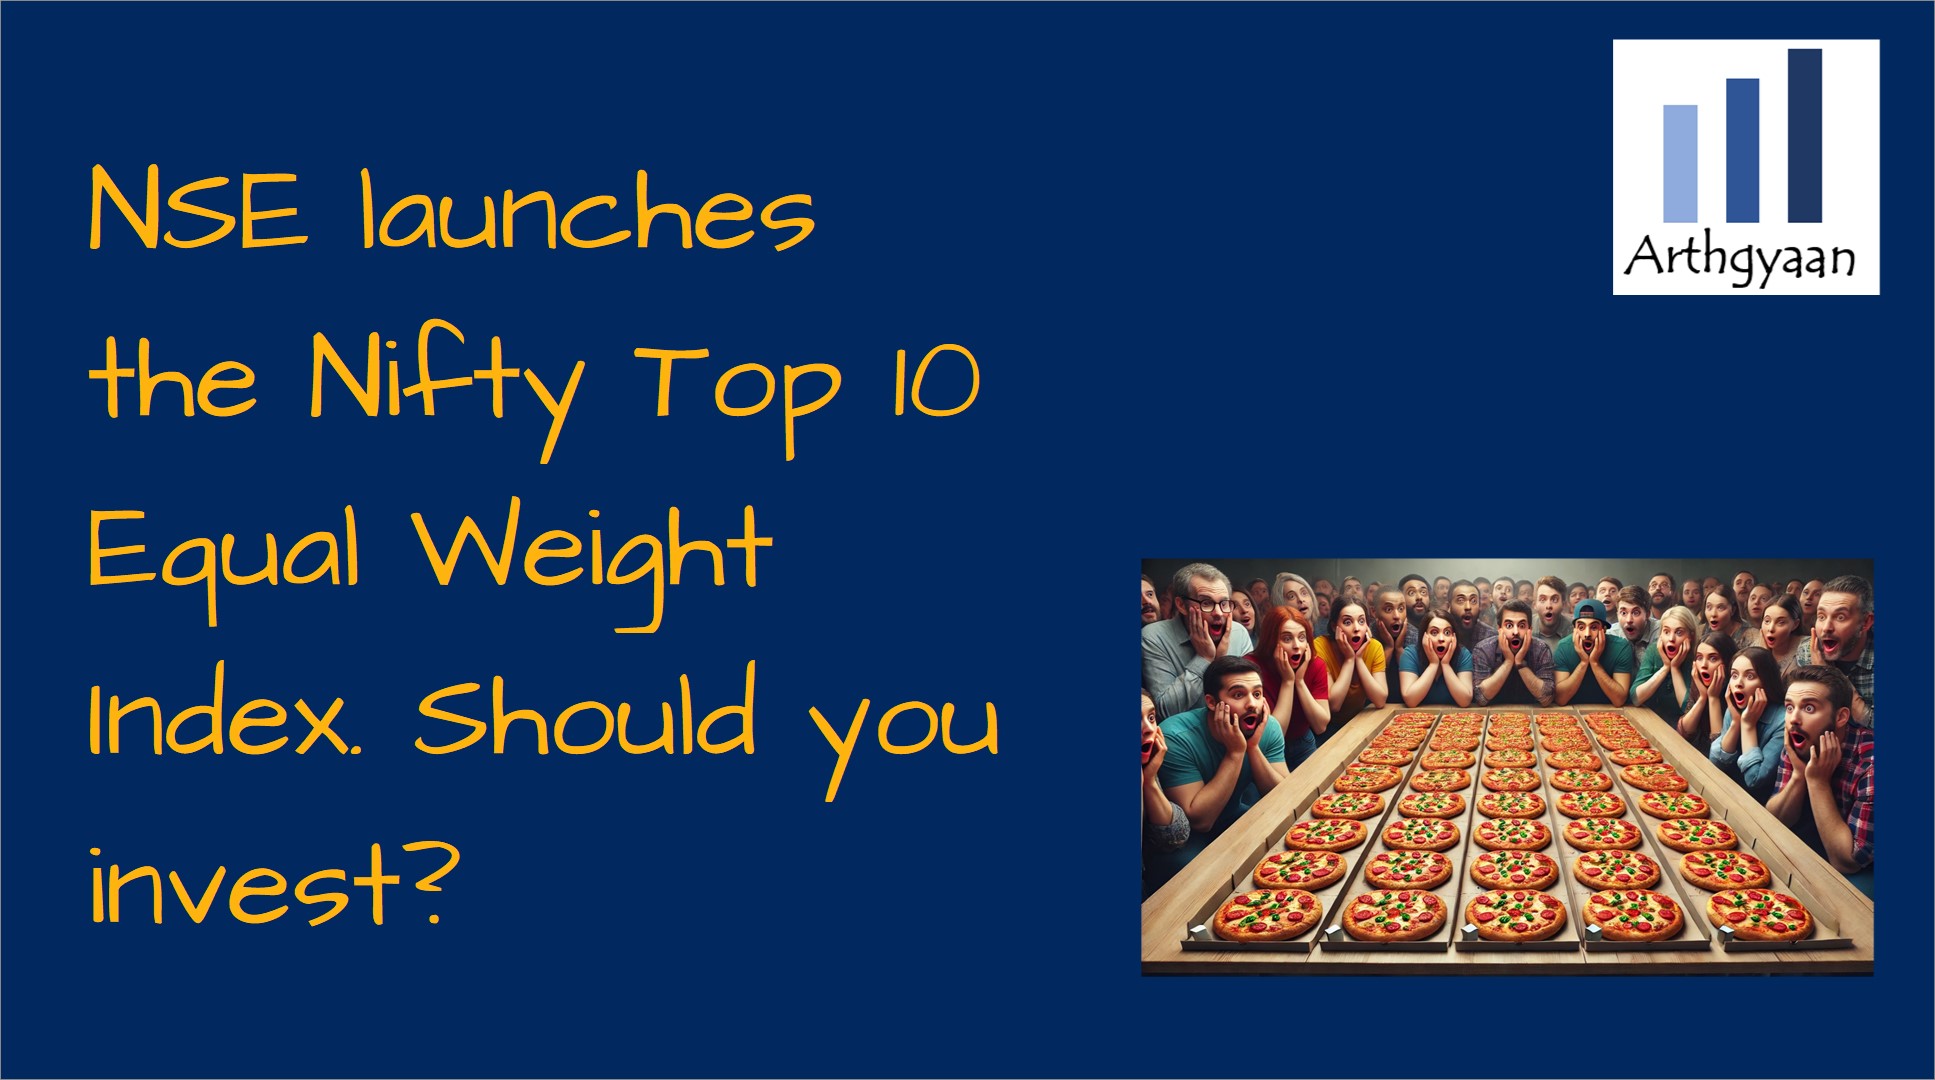 NSE launches the Nifty Top 10 Equal Weight Index. Should you invest?